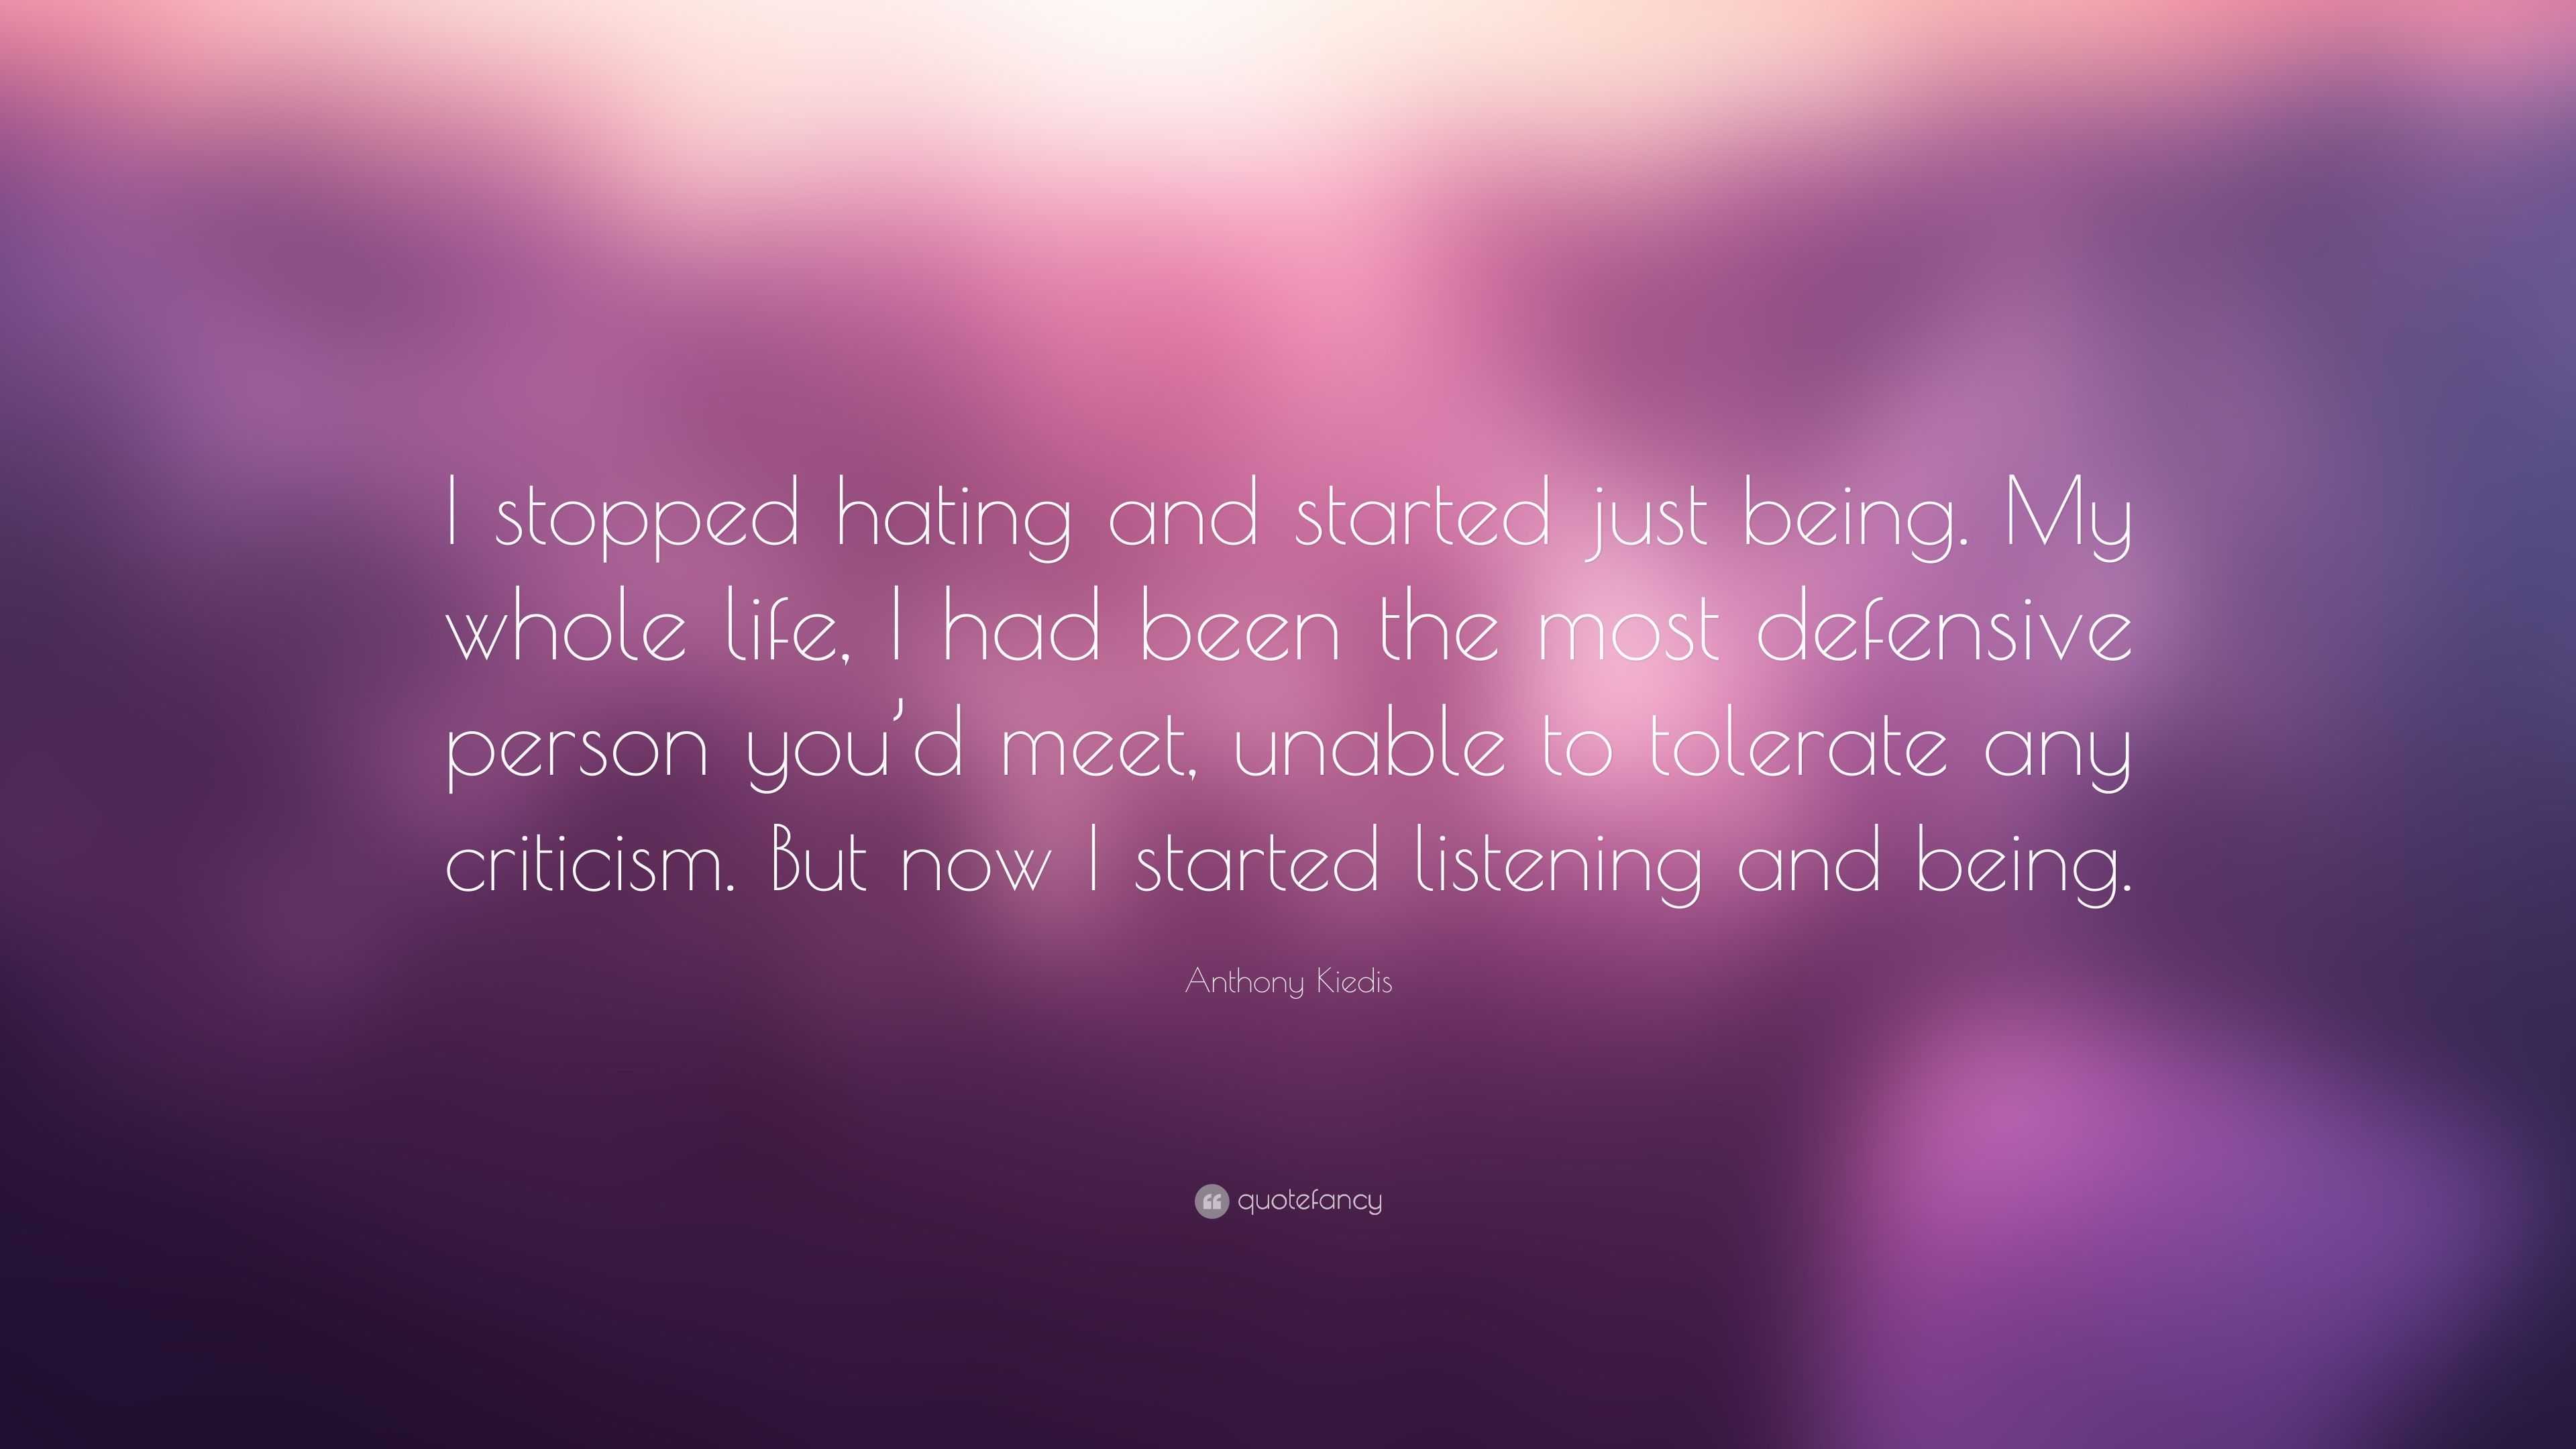 Anthony Kiedis Quote: “I stopped hating and started just being. My ...